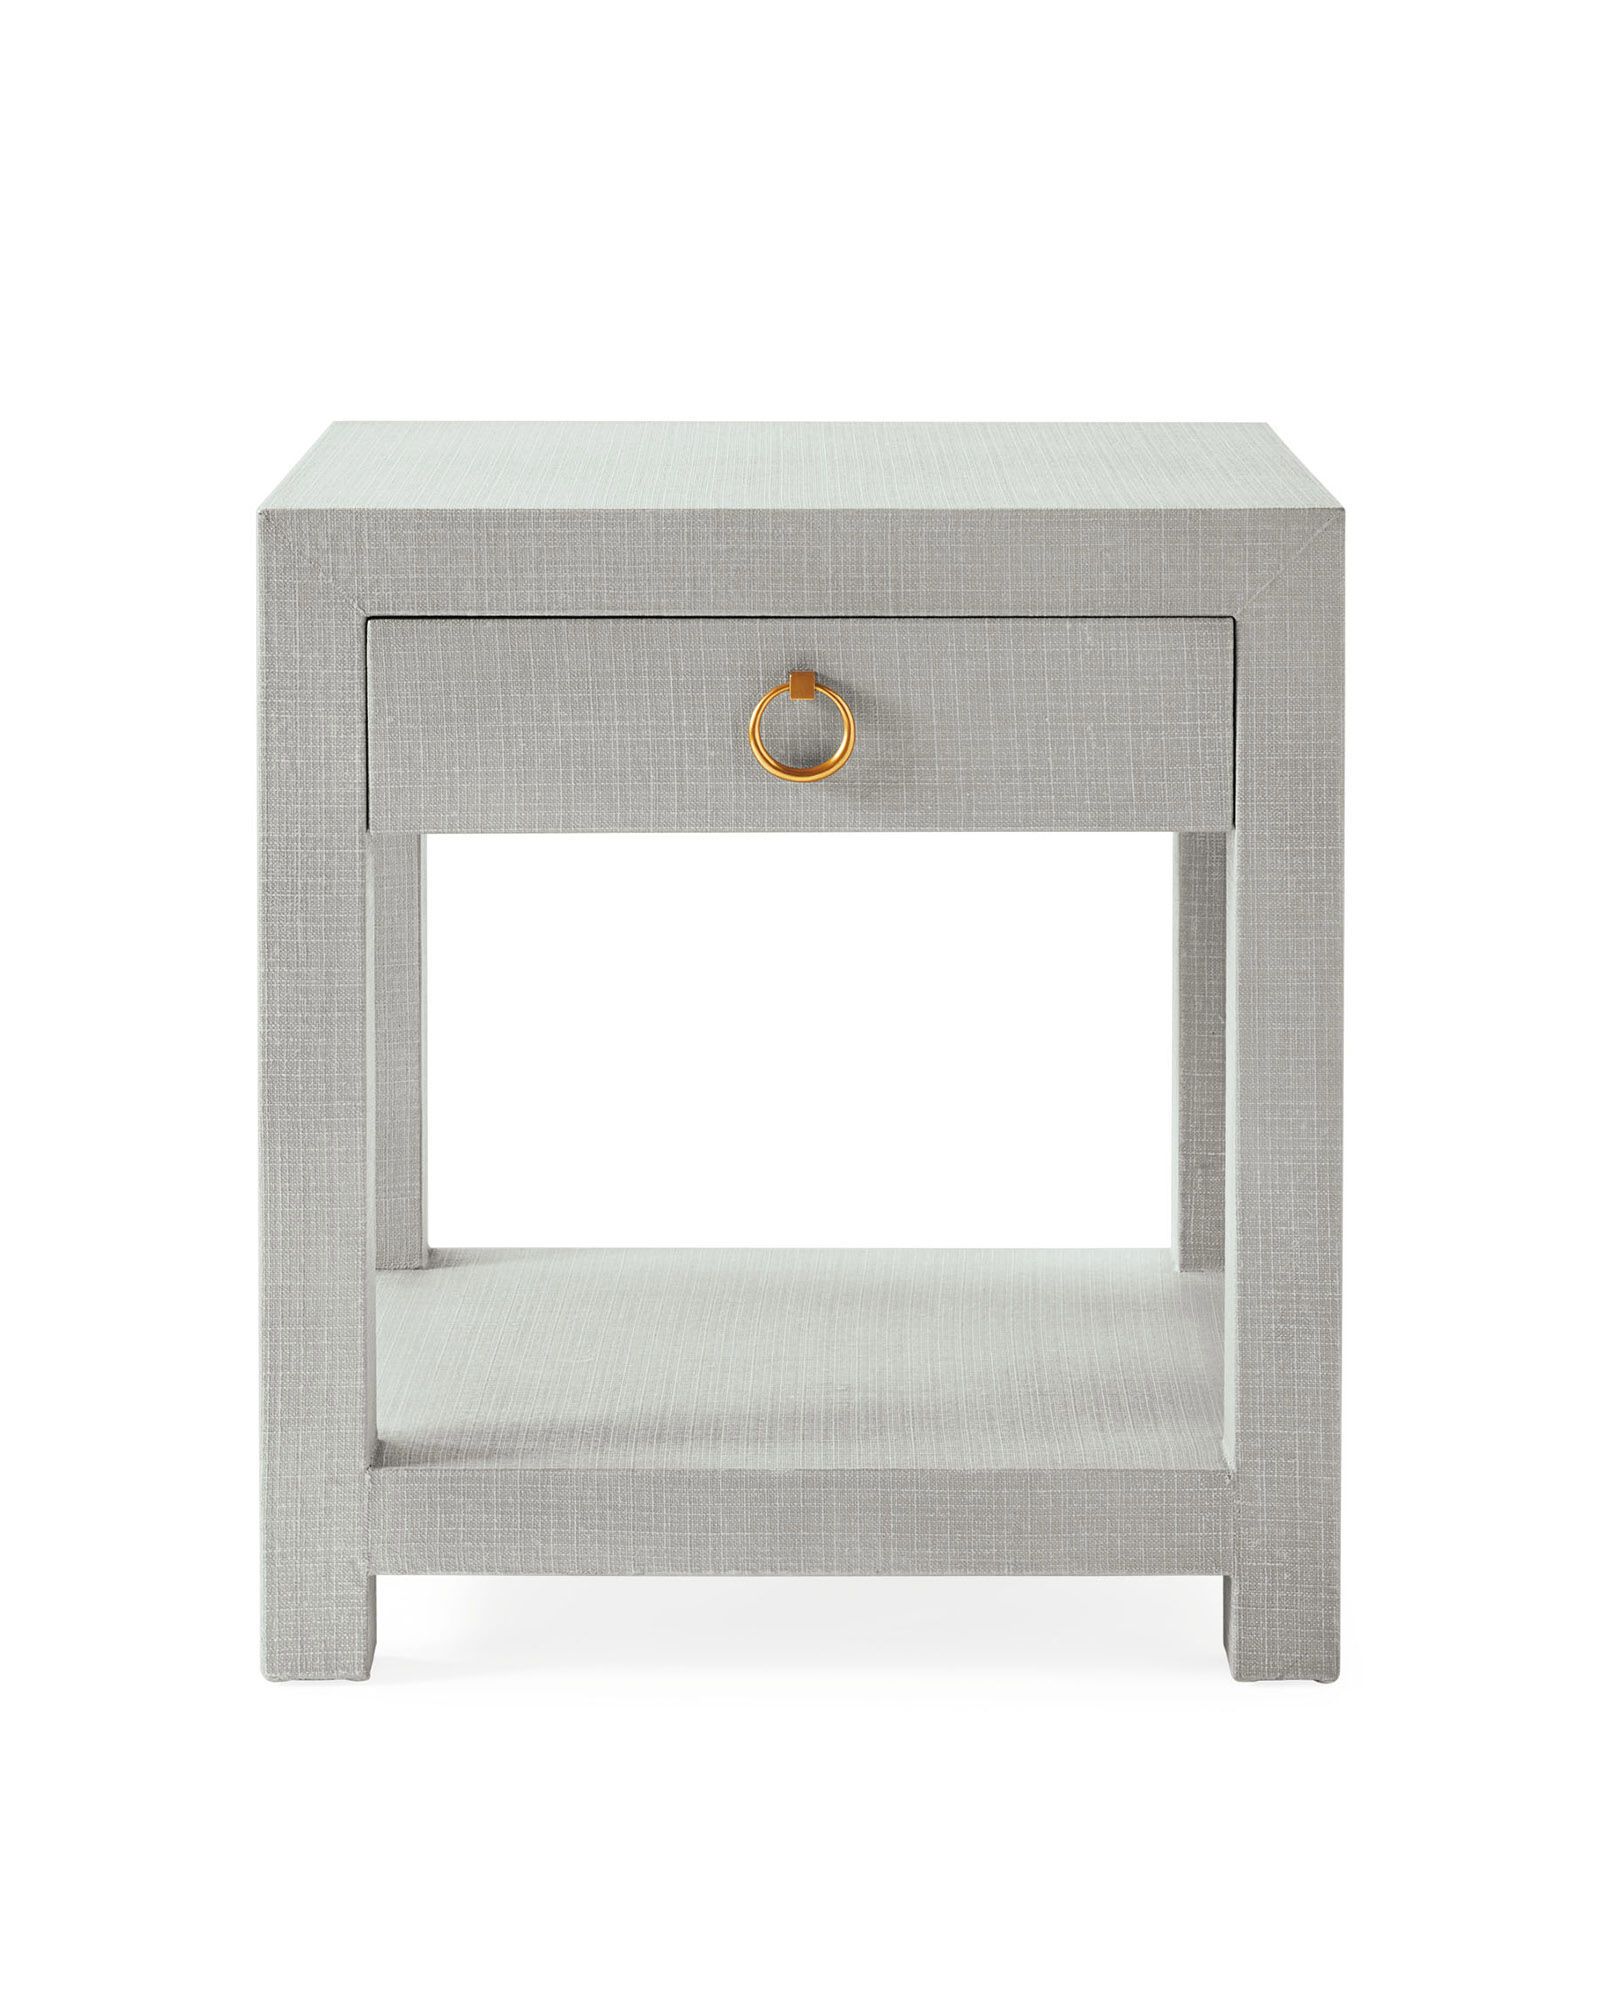 Driftway 1-Drawer Nightstand | Serena and Lily